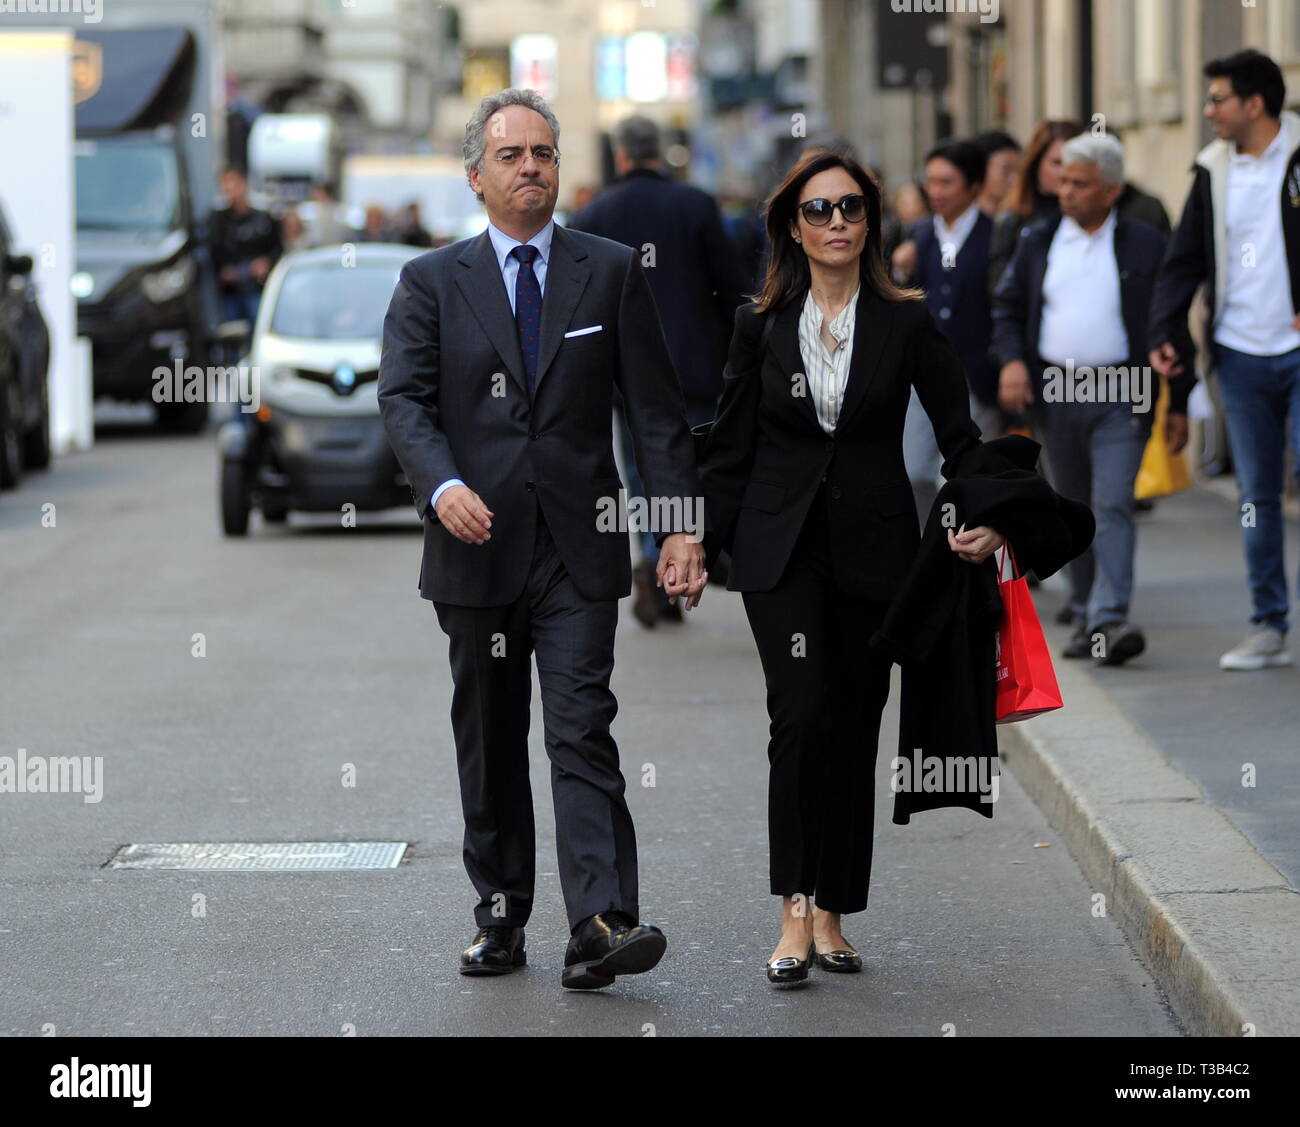 Milan, Mara Carfagna and Alessandro Ruben out for a walk L'aff.le and vice-president of the Chamber in 2018 MARA CARFAGNA surprised to walk in the center with the companion, the lawyer ALESSANDRO RUBEN. Stock Photo